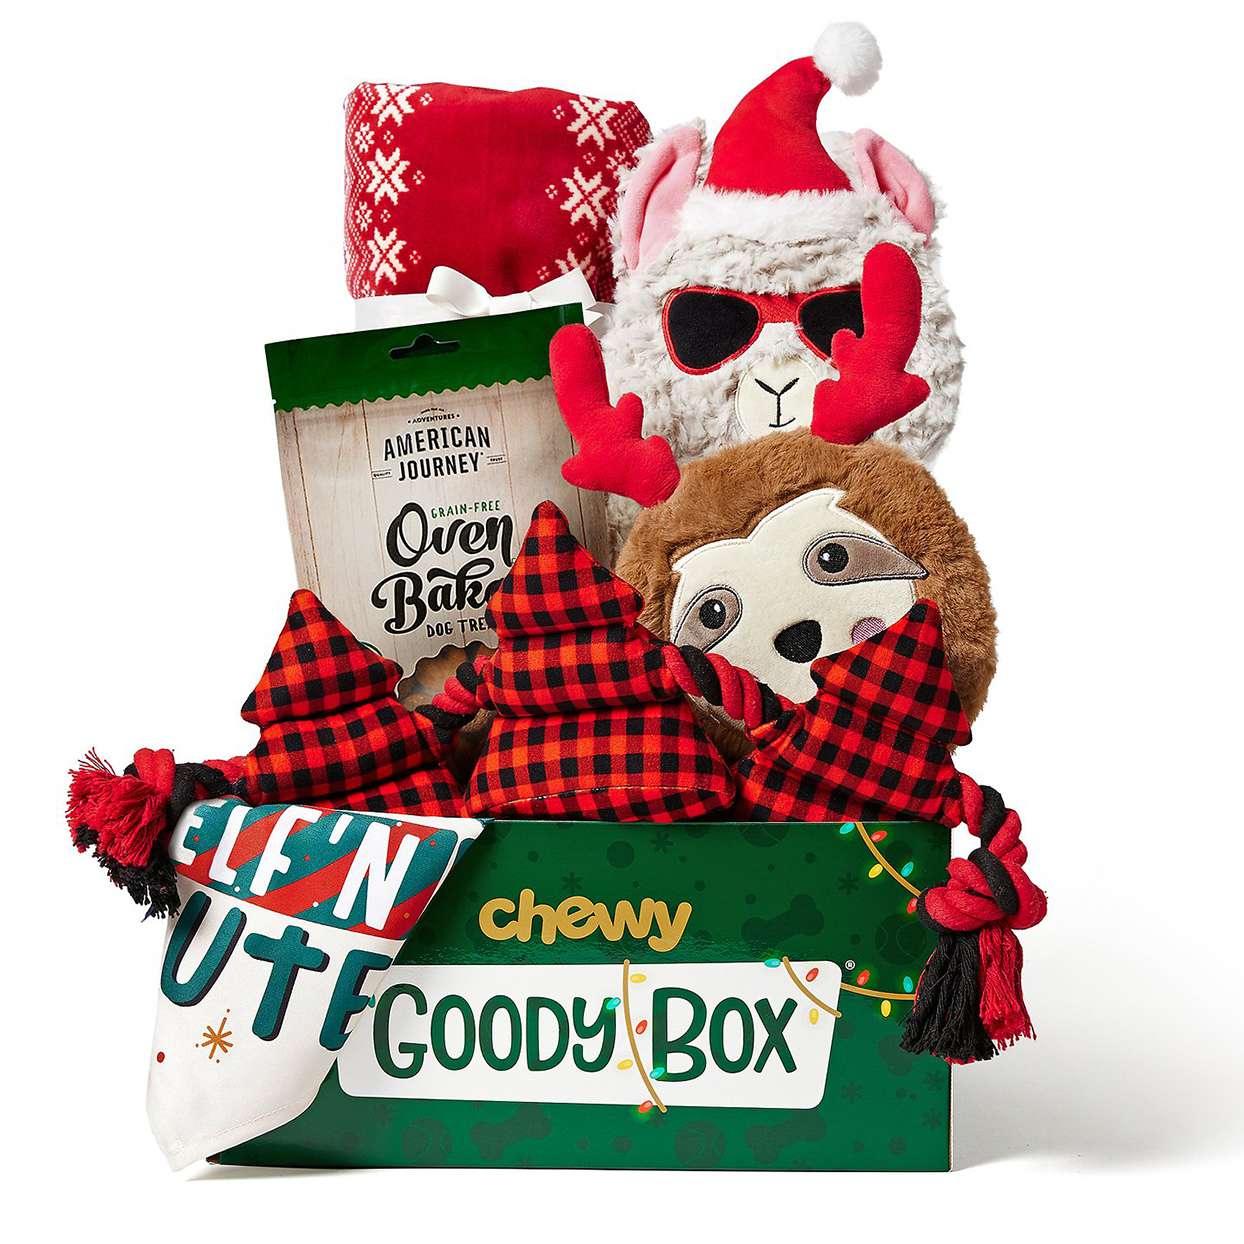 Product photo of a Holiday Goody Box